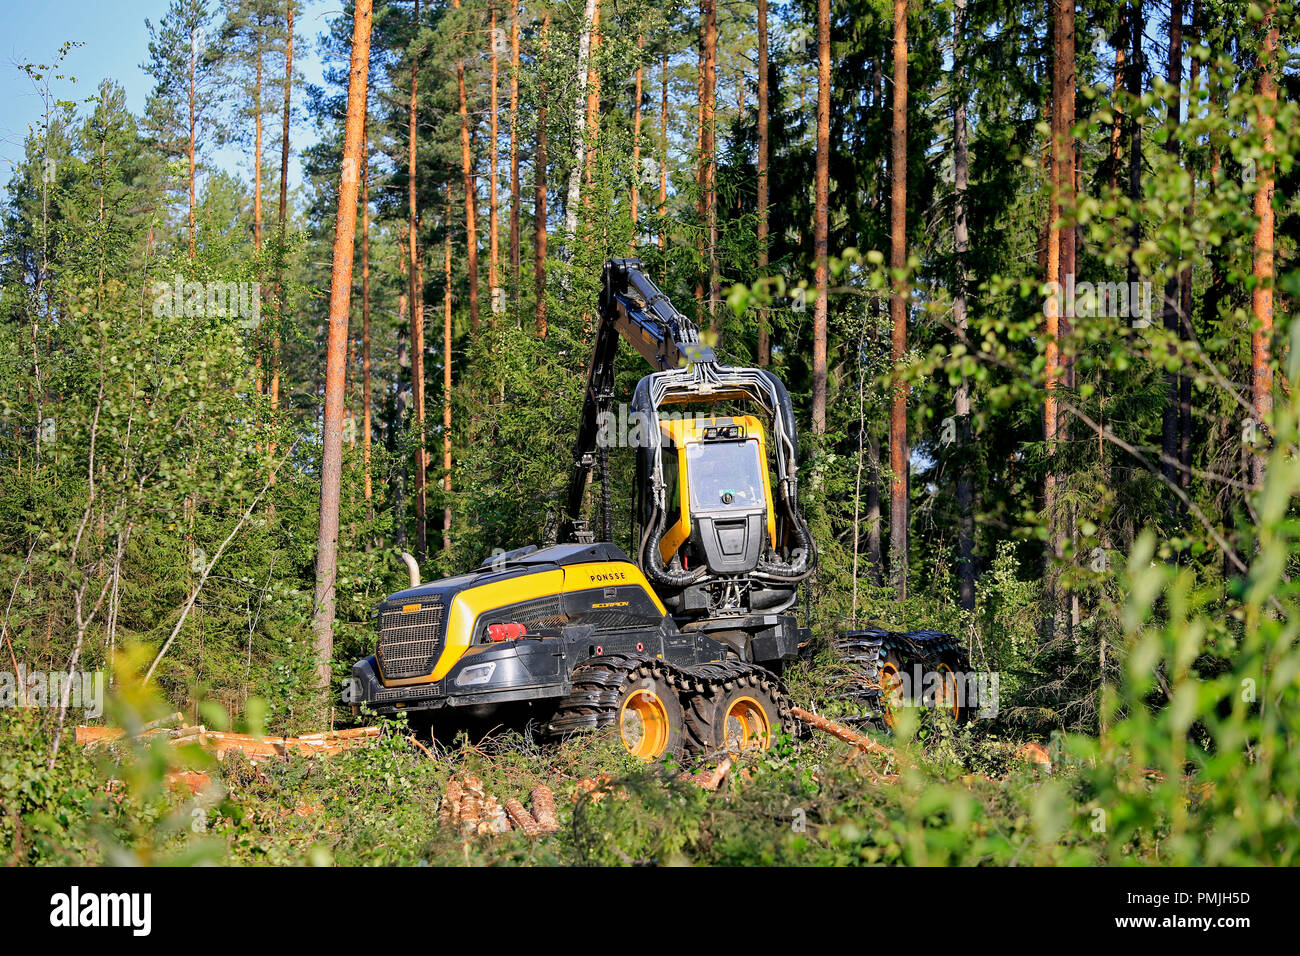 Ponsse Scorpion forest machine working at forest logging site on a sunny day of summer. Jyvaskyla, Finland - August 24, 2018. Stock Photo